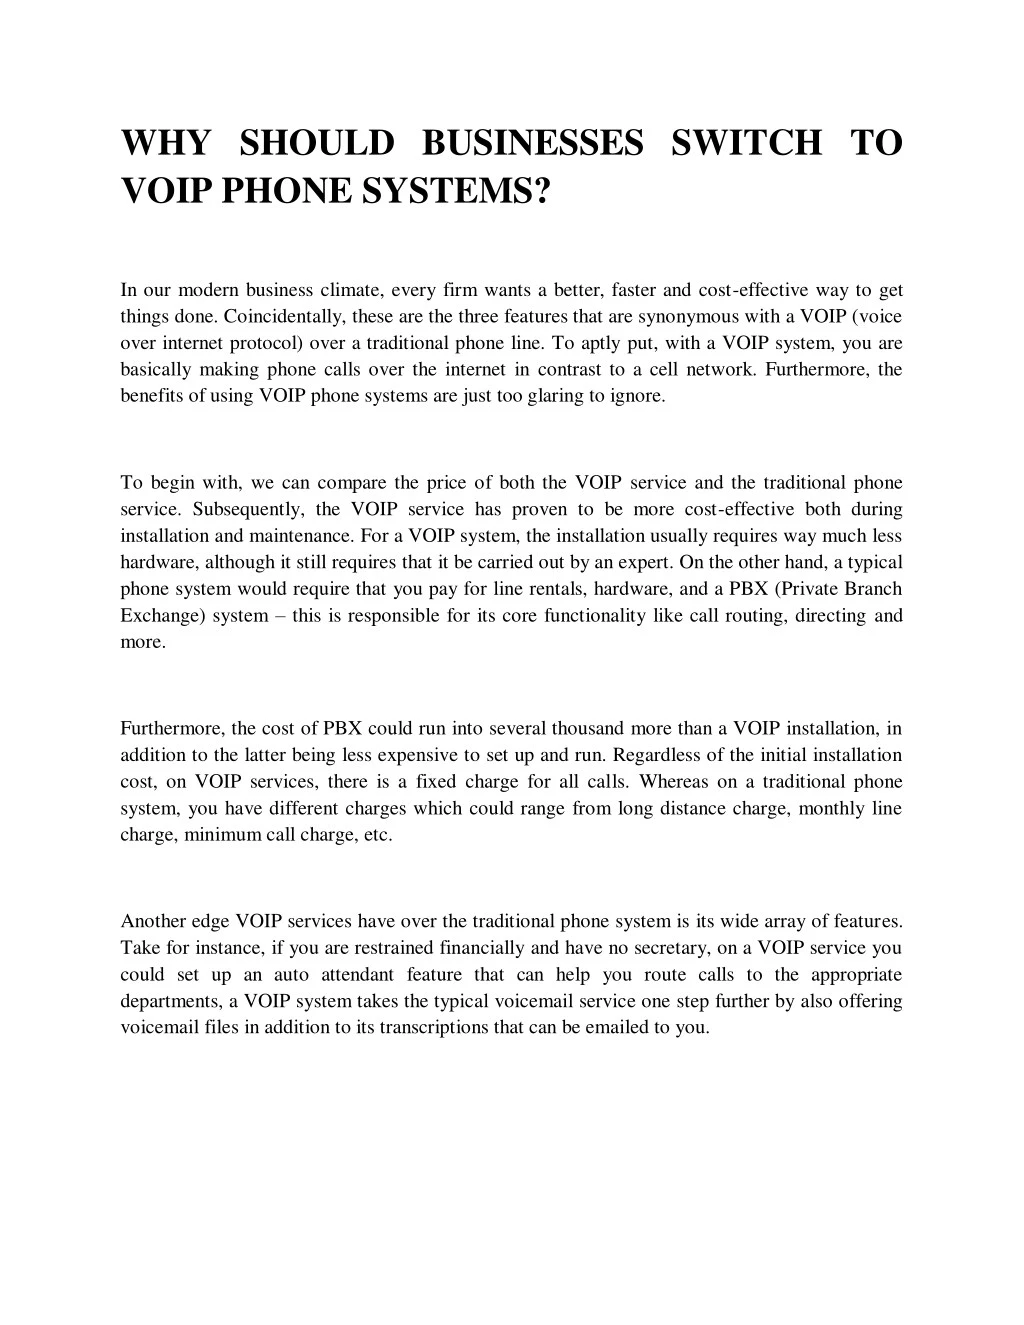 why should businesses switch to voip phone systems